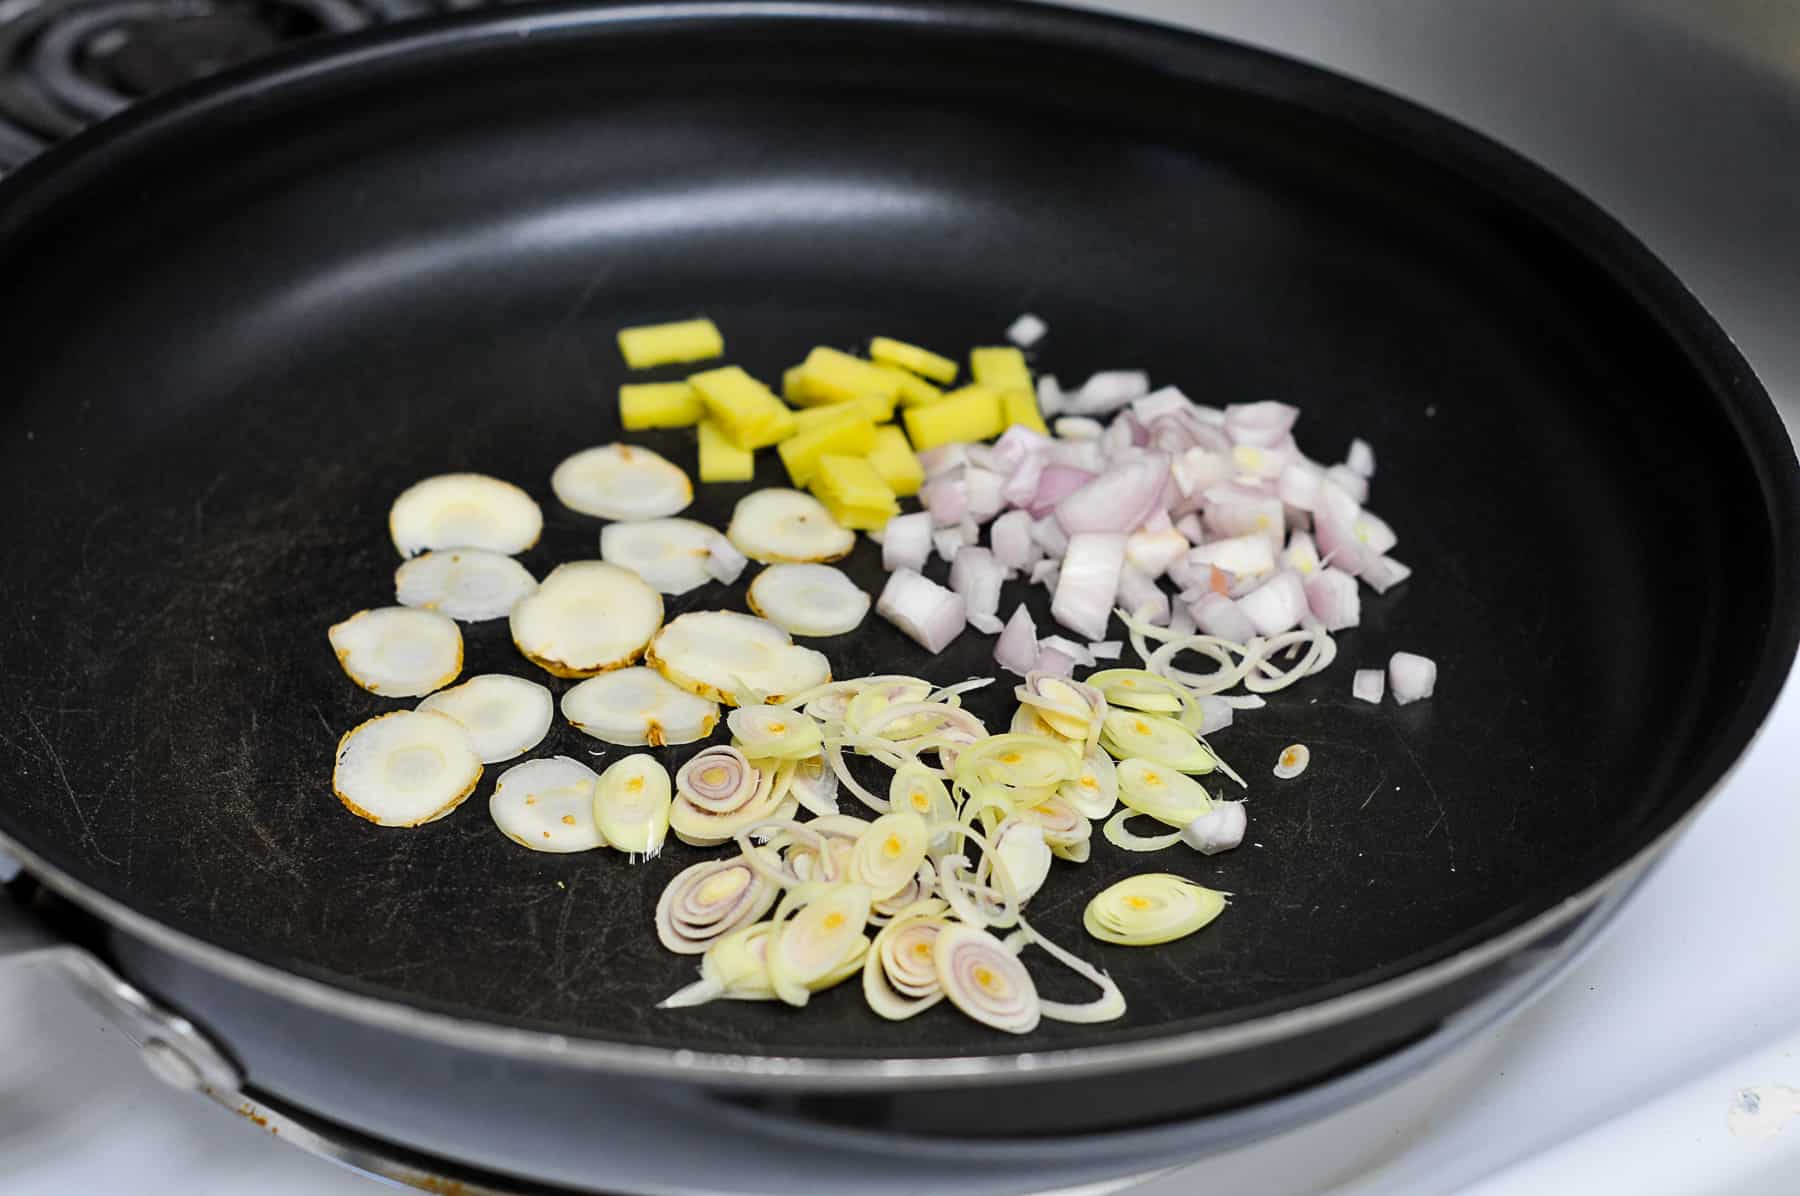 Dry fry the sliced lemongrass, galangal, ginger, and shallots 